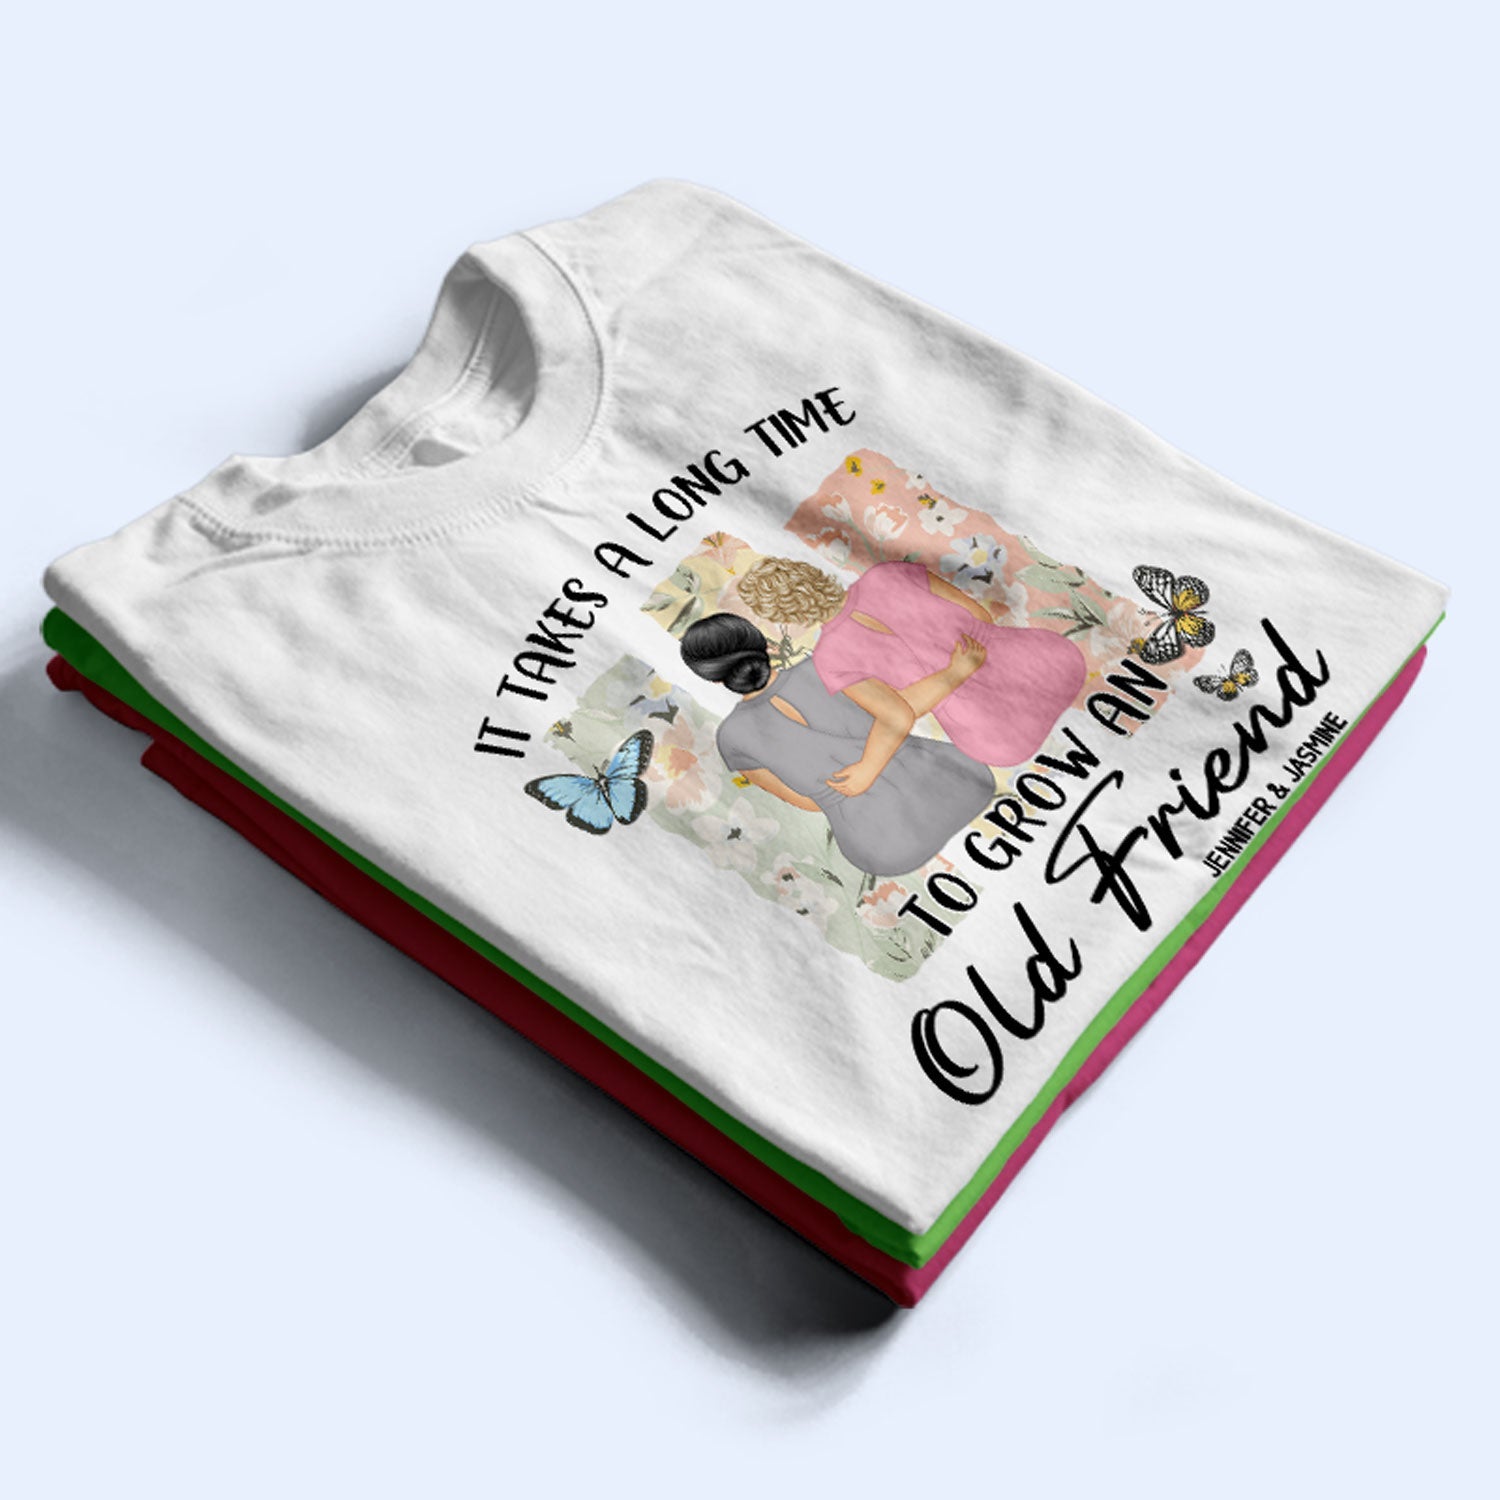 Grow An Old Friend - Gift For Bestie - Personalized T Shirt